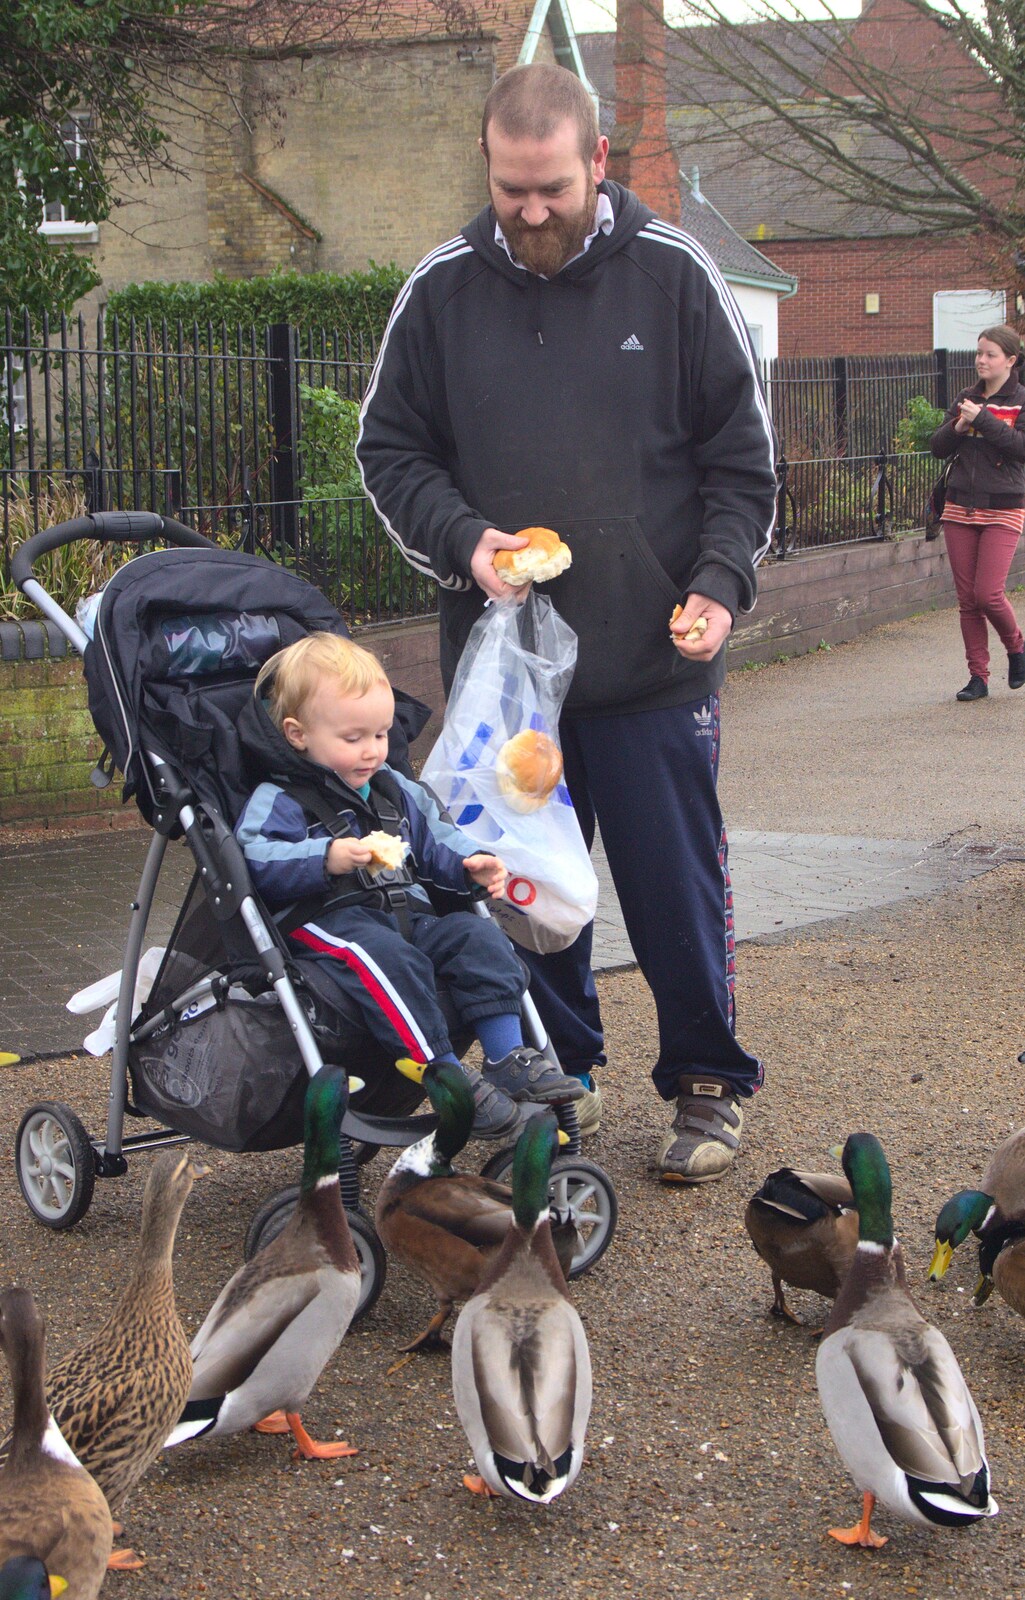 A child in a buggy is mobbed by ducks from Pizza Express with Grandad, Bury St. Edmunds, Suffolk - 29th December 2011